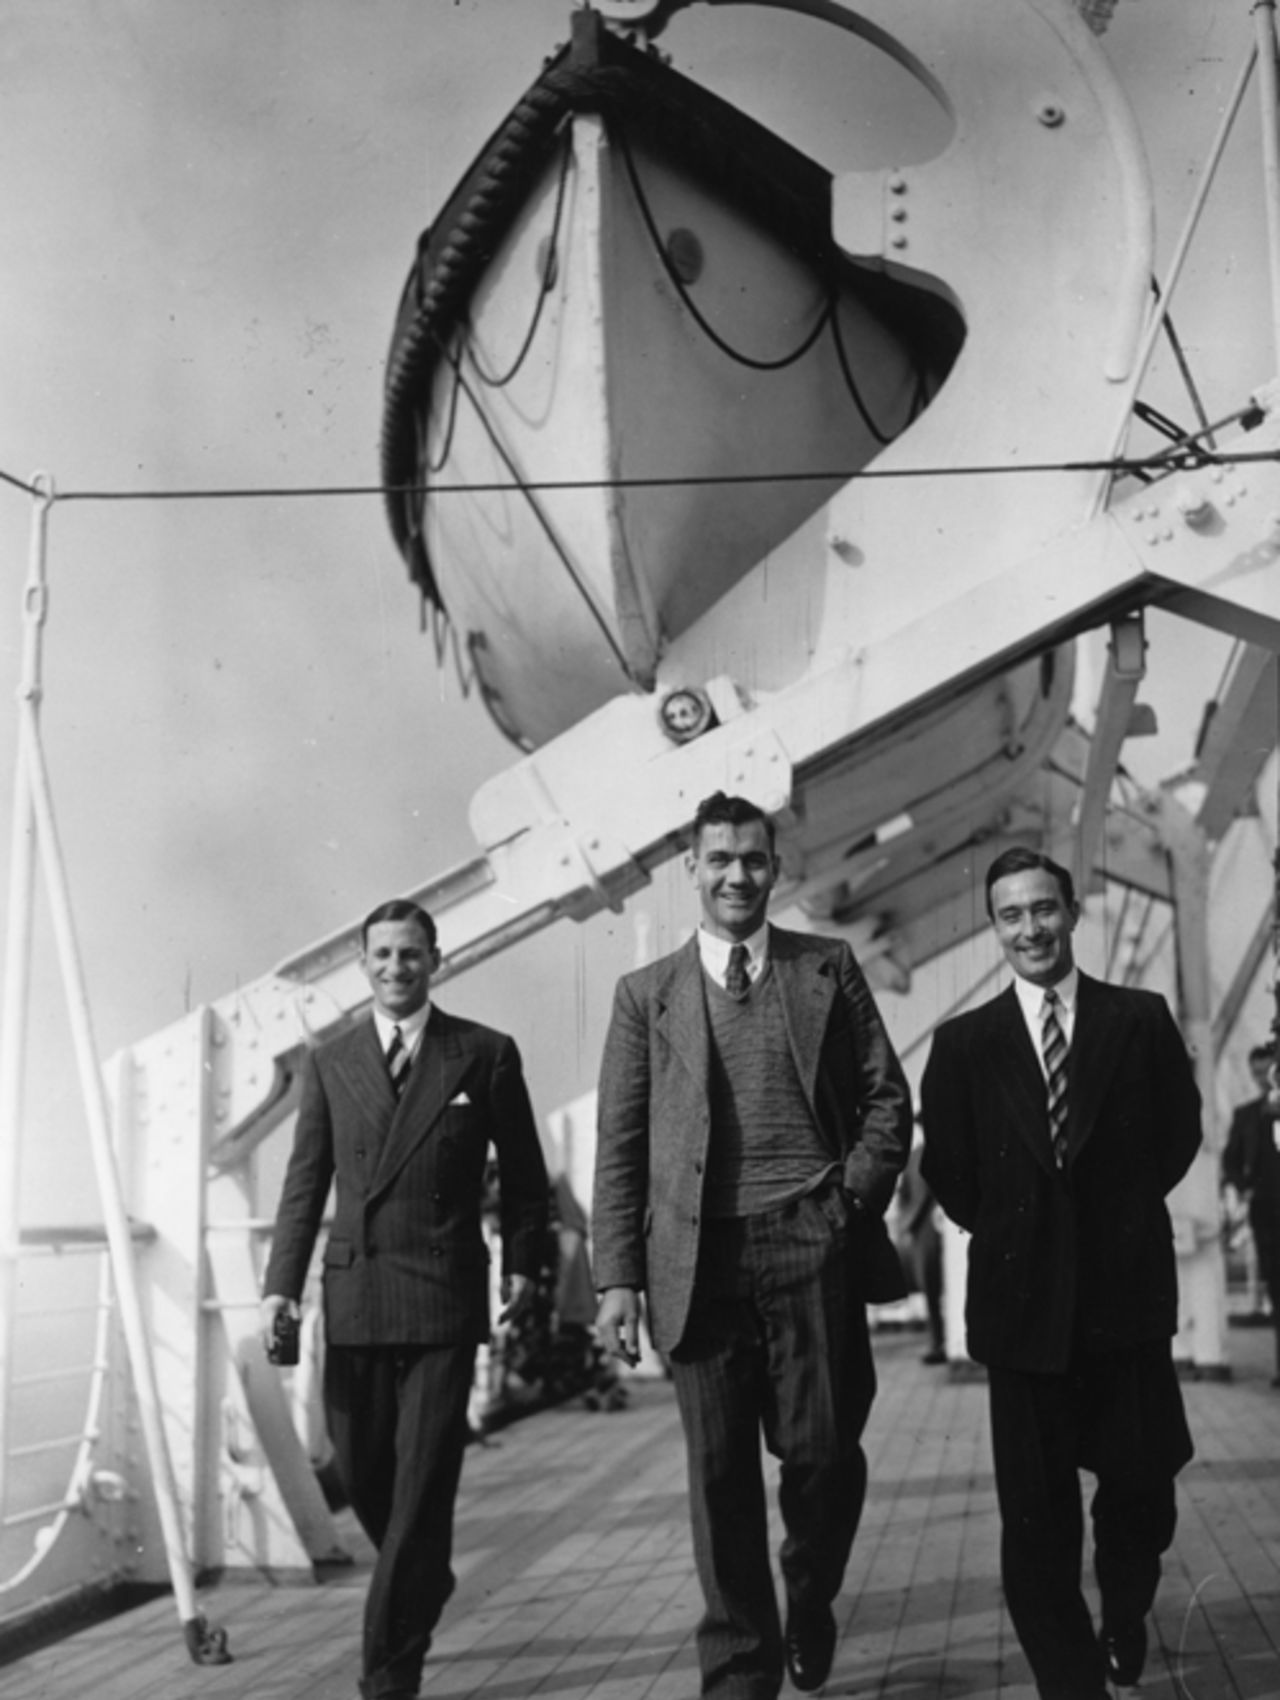 Len Hutton, Alec Bedser, and Denis Compton walking on deck on the <I>Dublin Castle</I> prior to departure for South Africa, October 7, 1948